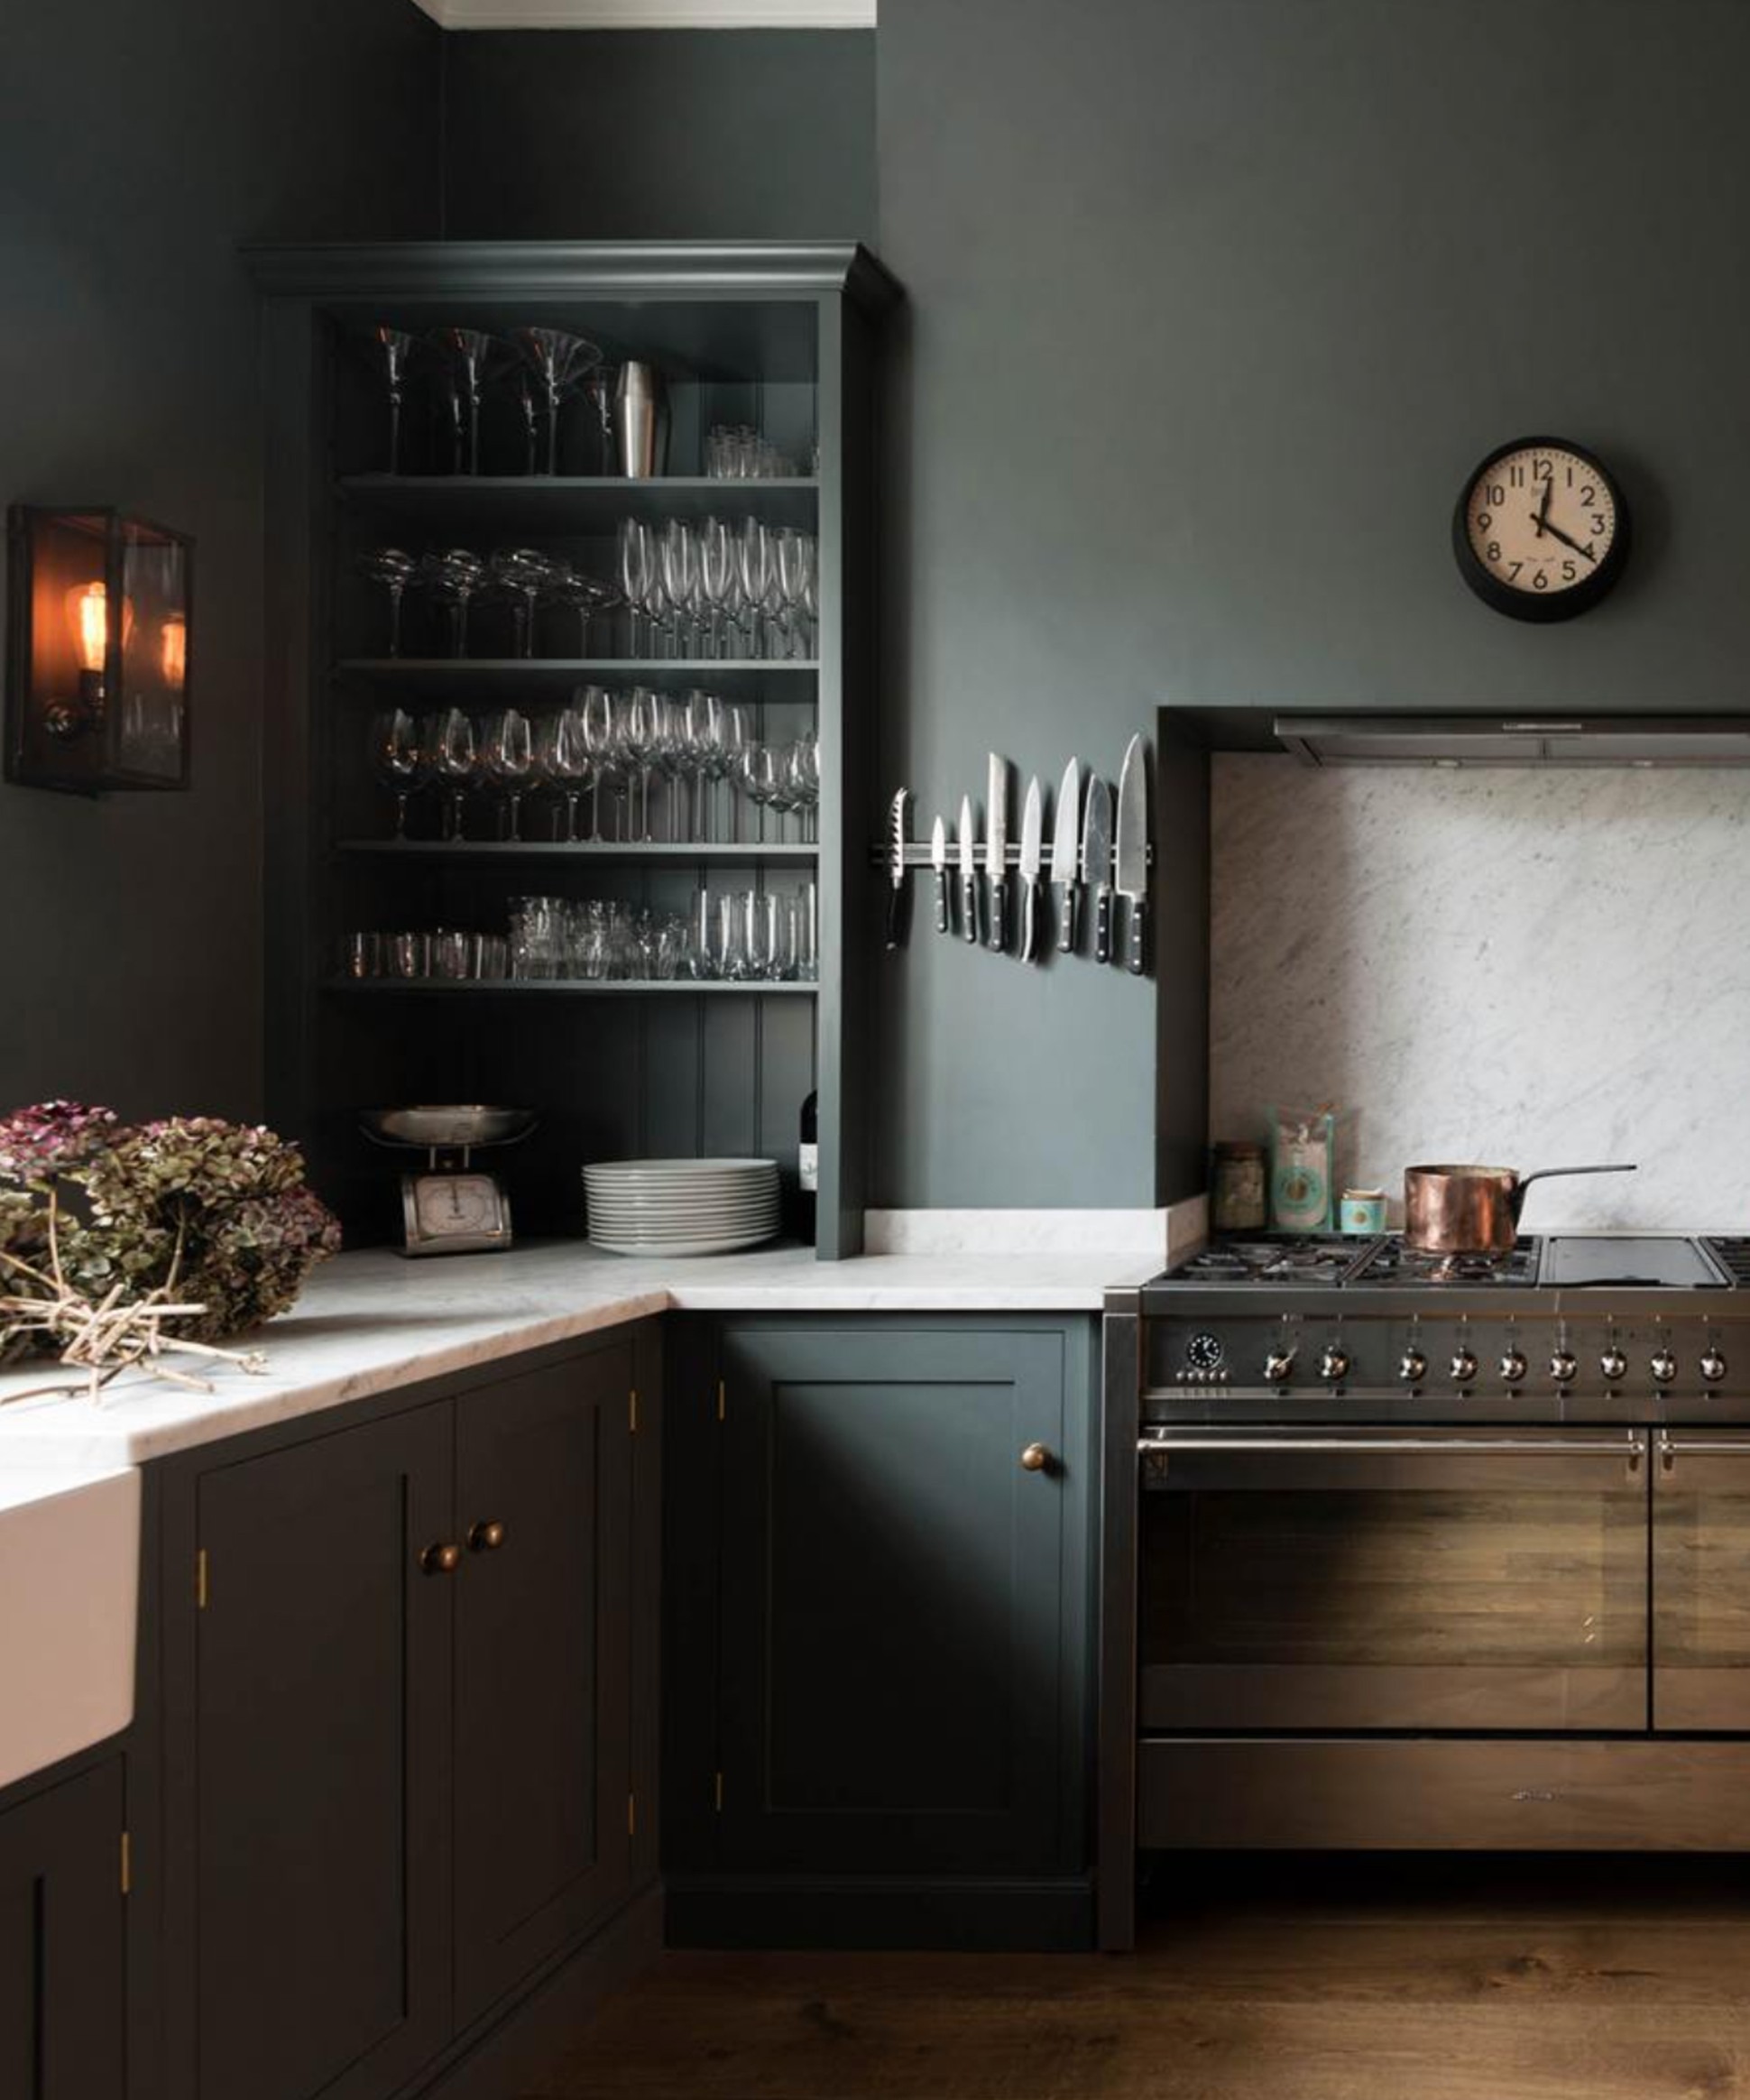 Grey kitchen ideas - designers explain how to use this color  - grey kitchen walls